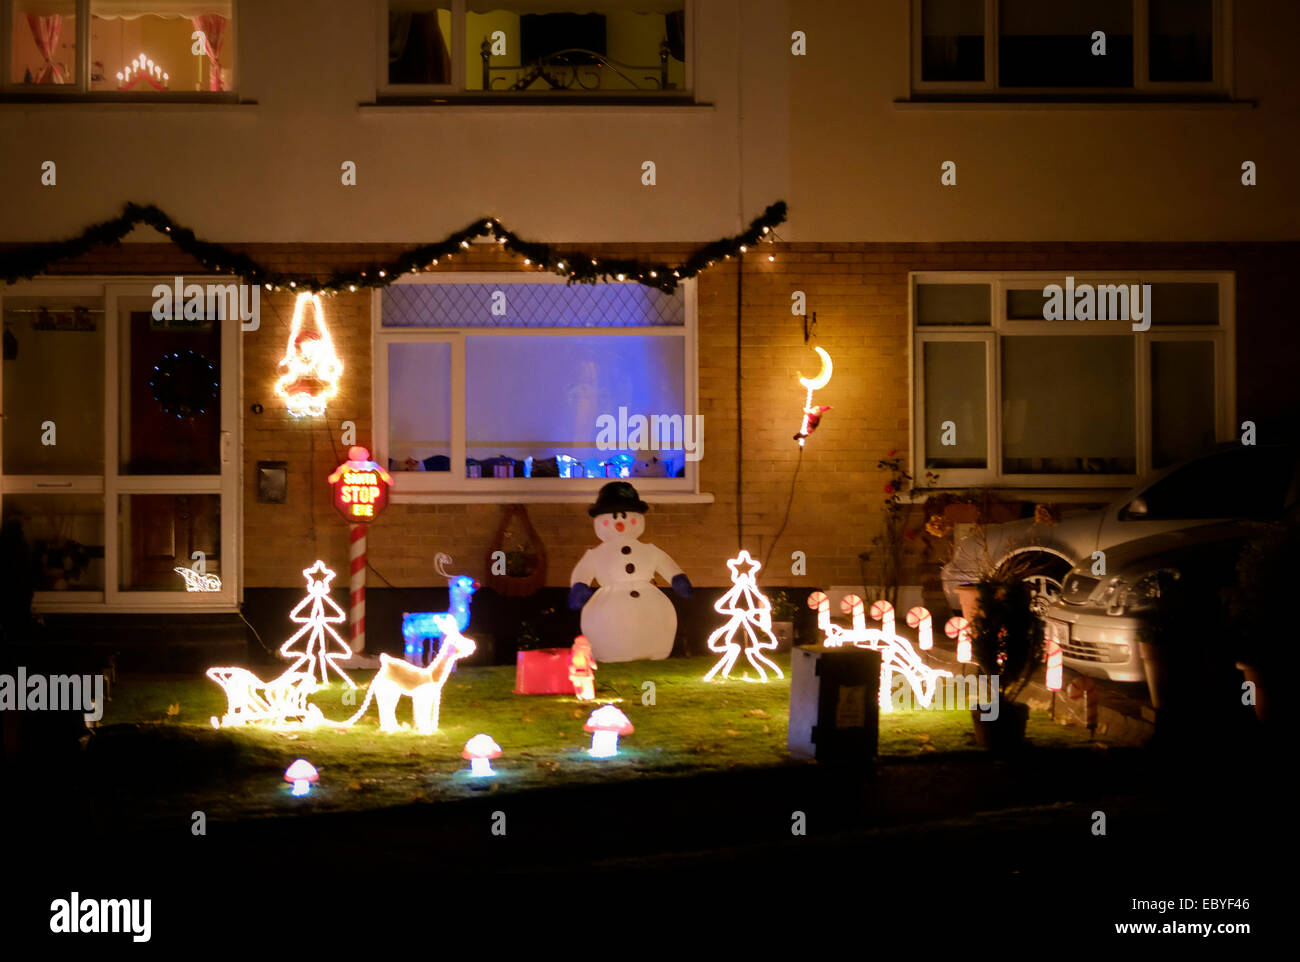 House with really elaborate Christmas lights in Ireland Stock Photo